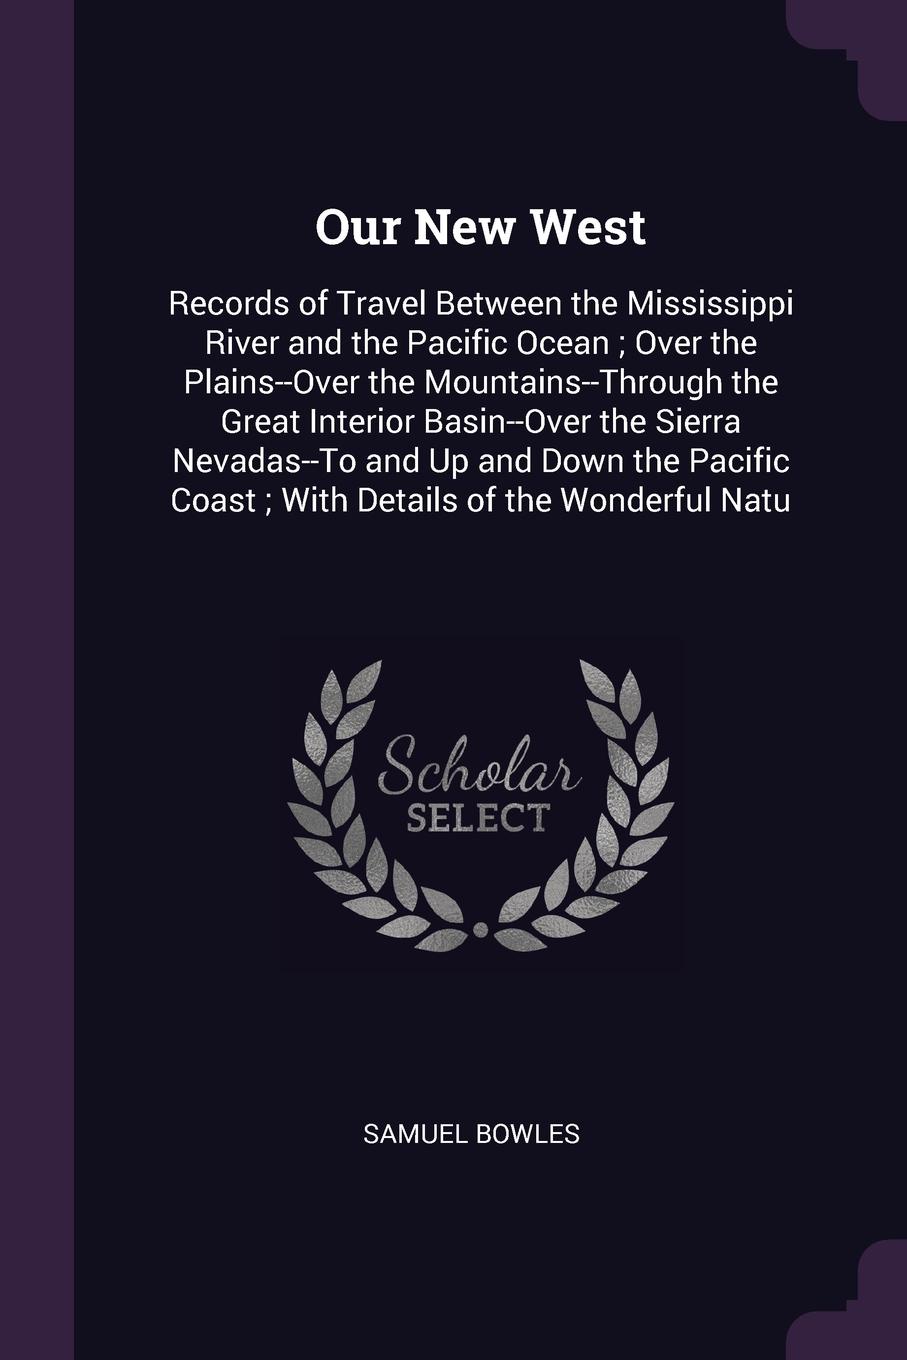 Our New West. Records of Travel Between the Mississippi River and the Pacific Ocean ; Over the Plains--Over the Mountains--Through the Great Interior Basin--Over the Sierra Nevadas--To and Up and Down the Pacific Coast ; With Details of the Wonder...